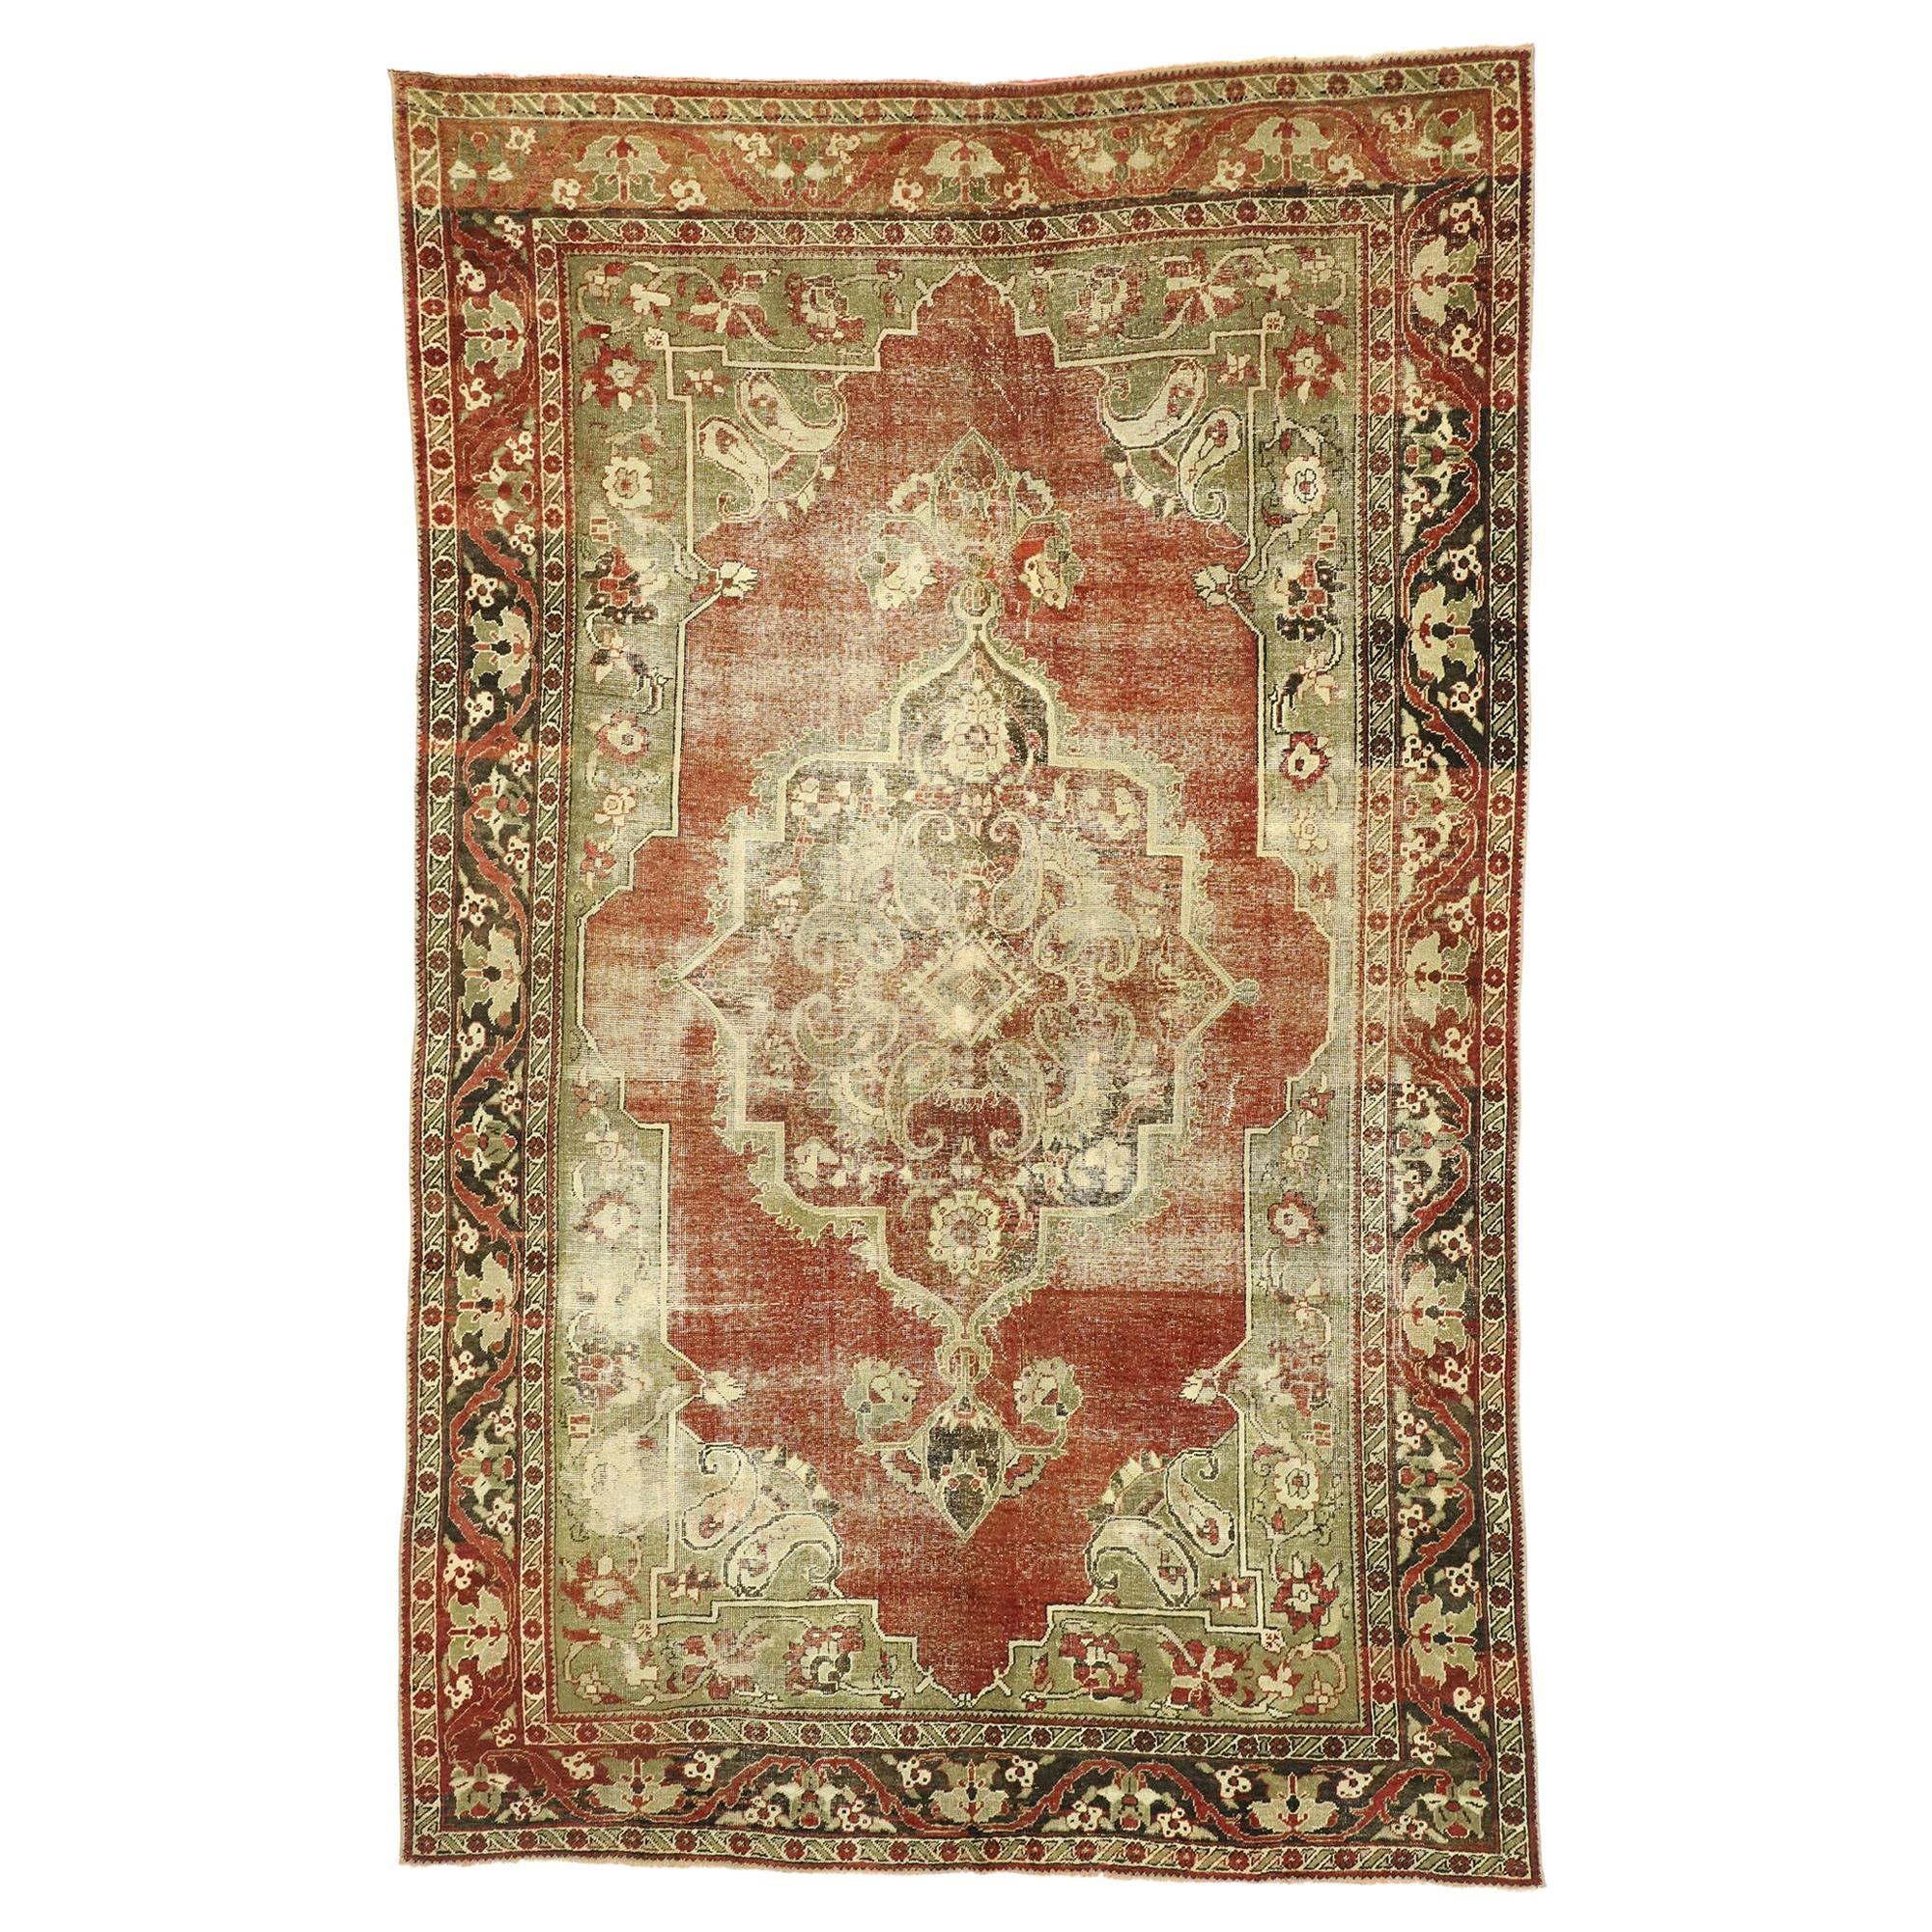 Distressed Vintage Turkish Oushak Rug with Rustic English Manor Style